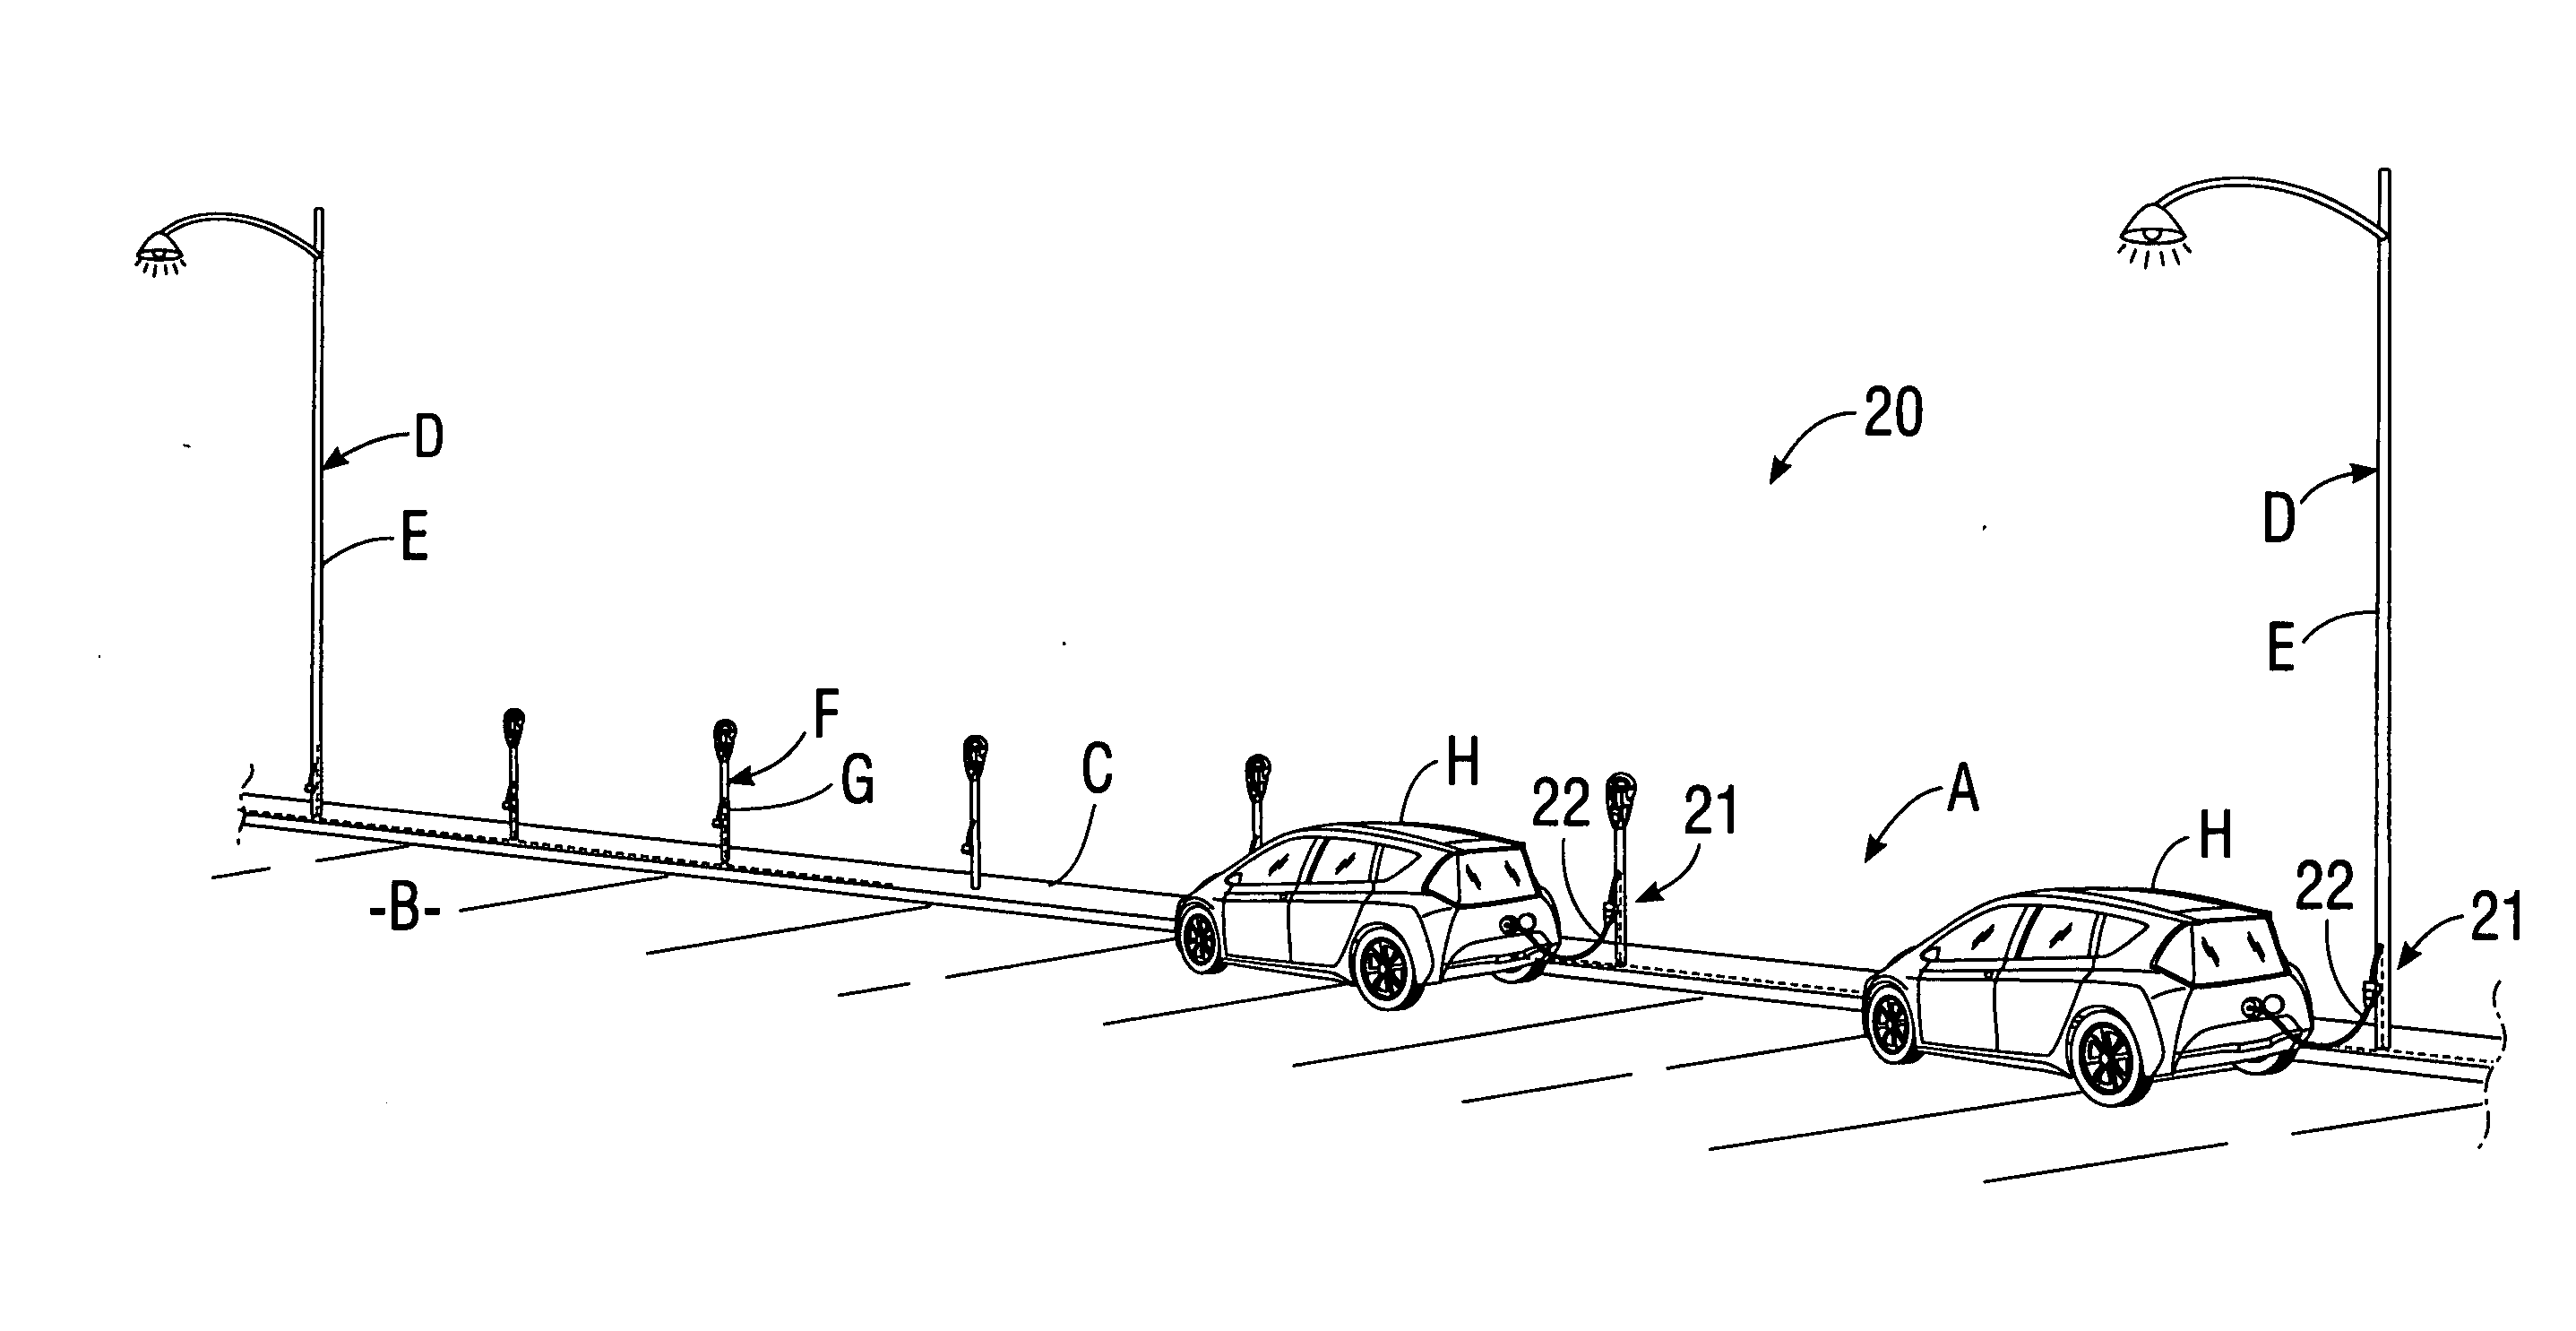 System for charging electric vehicle batteries from street lights and parking meters